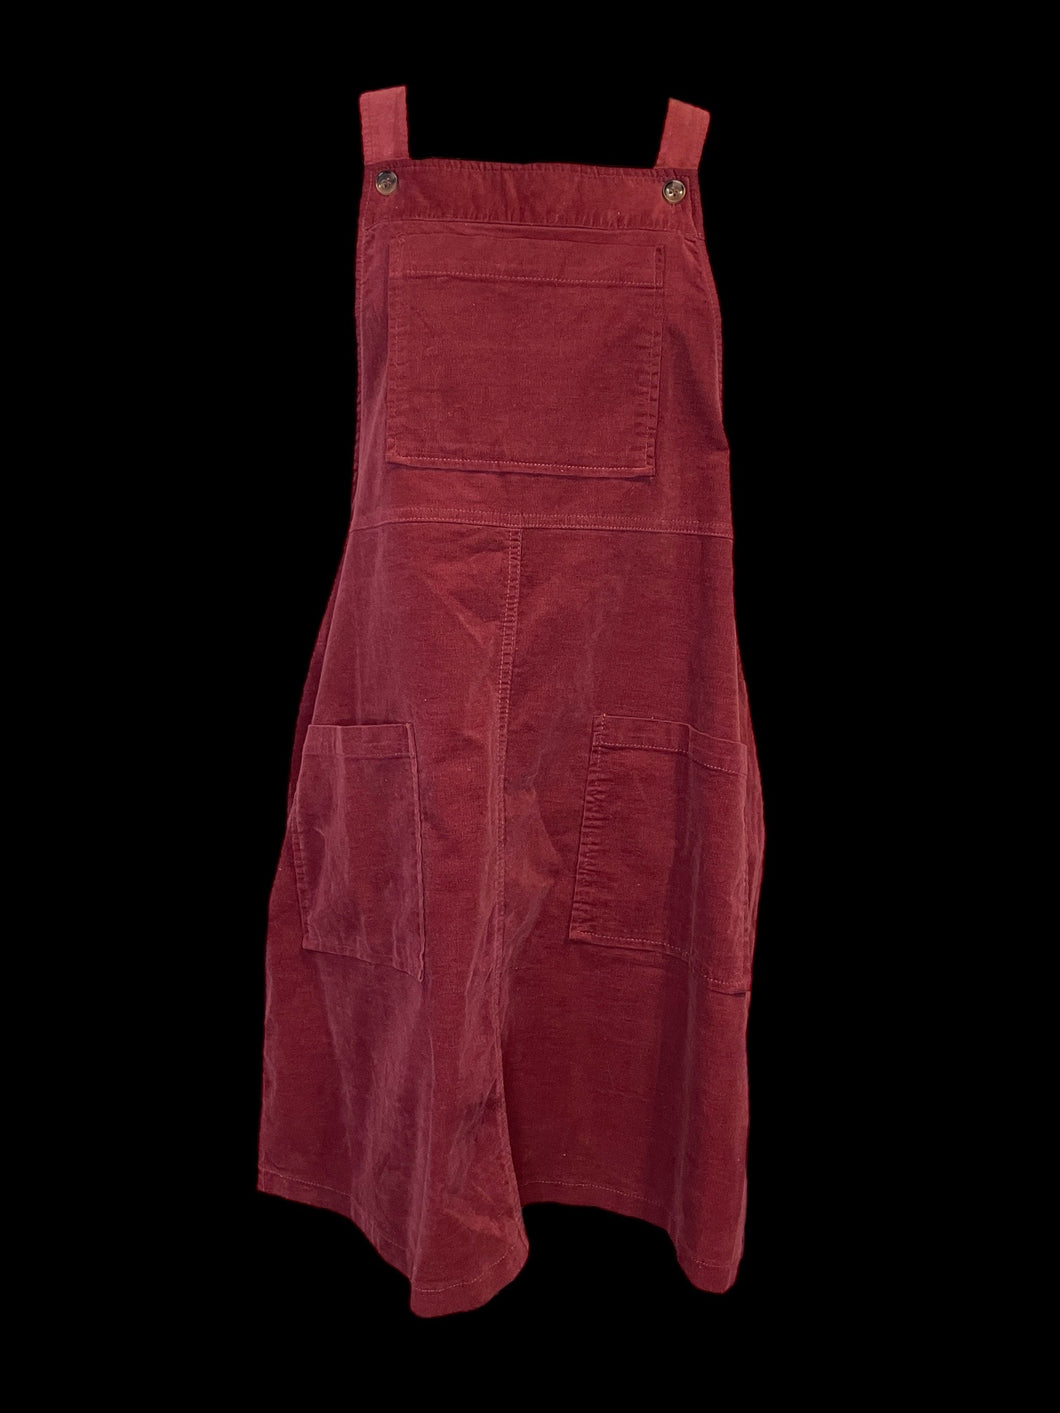 0X Maroon overall dress w/ button adjustable straps, & pockets